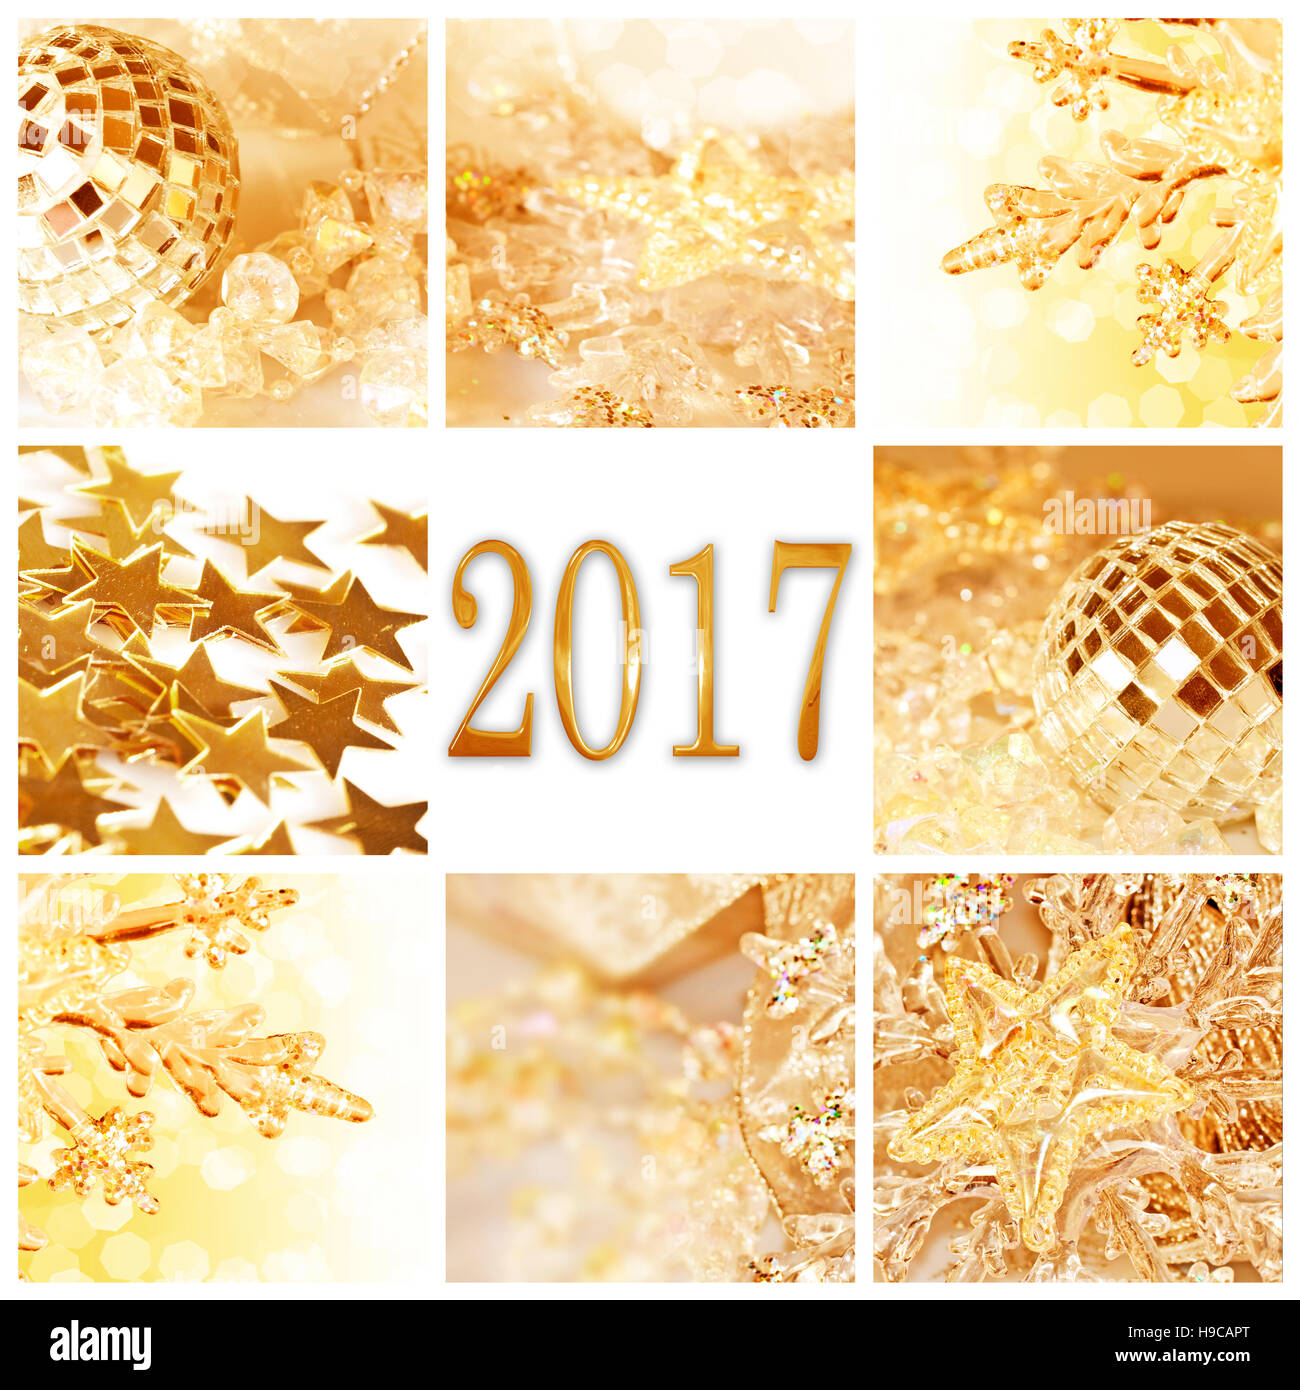 2017, golden christmas ornaments collage square greeting card Stock Photo